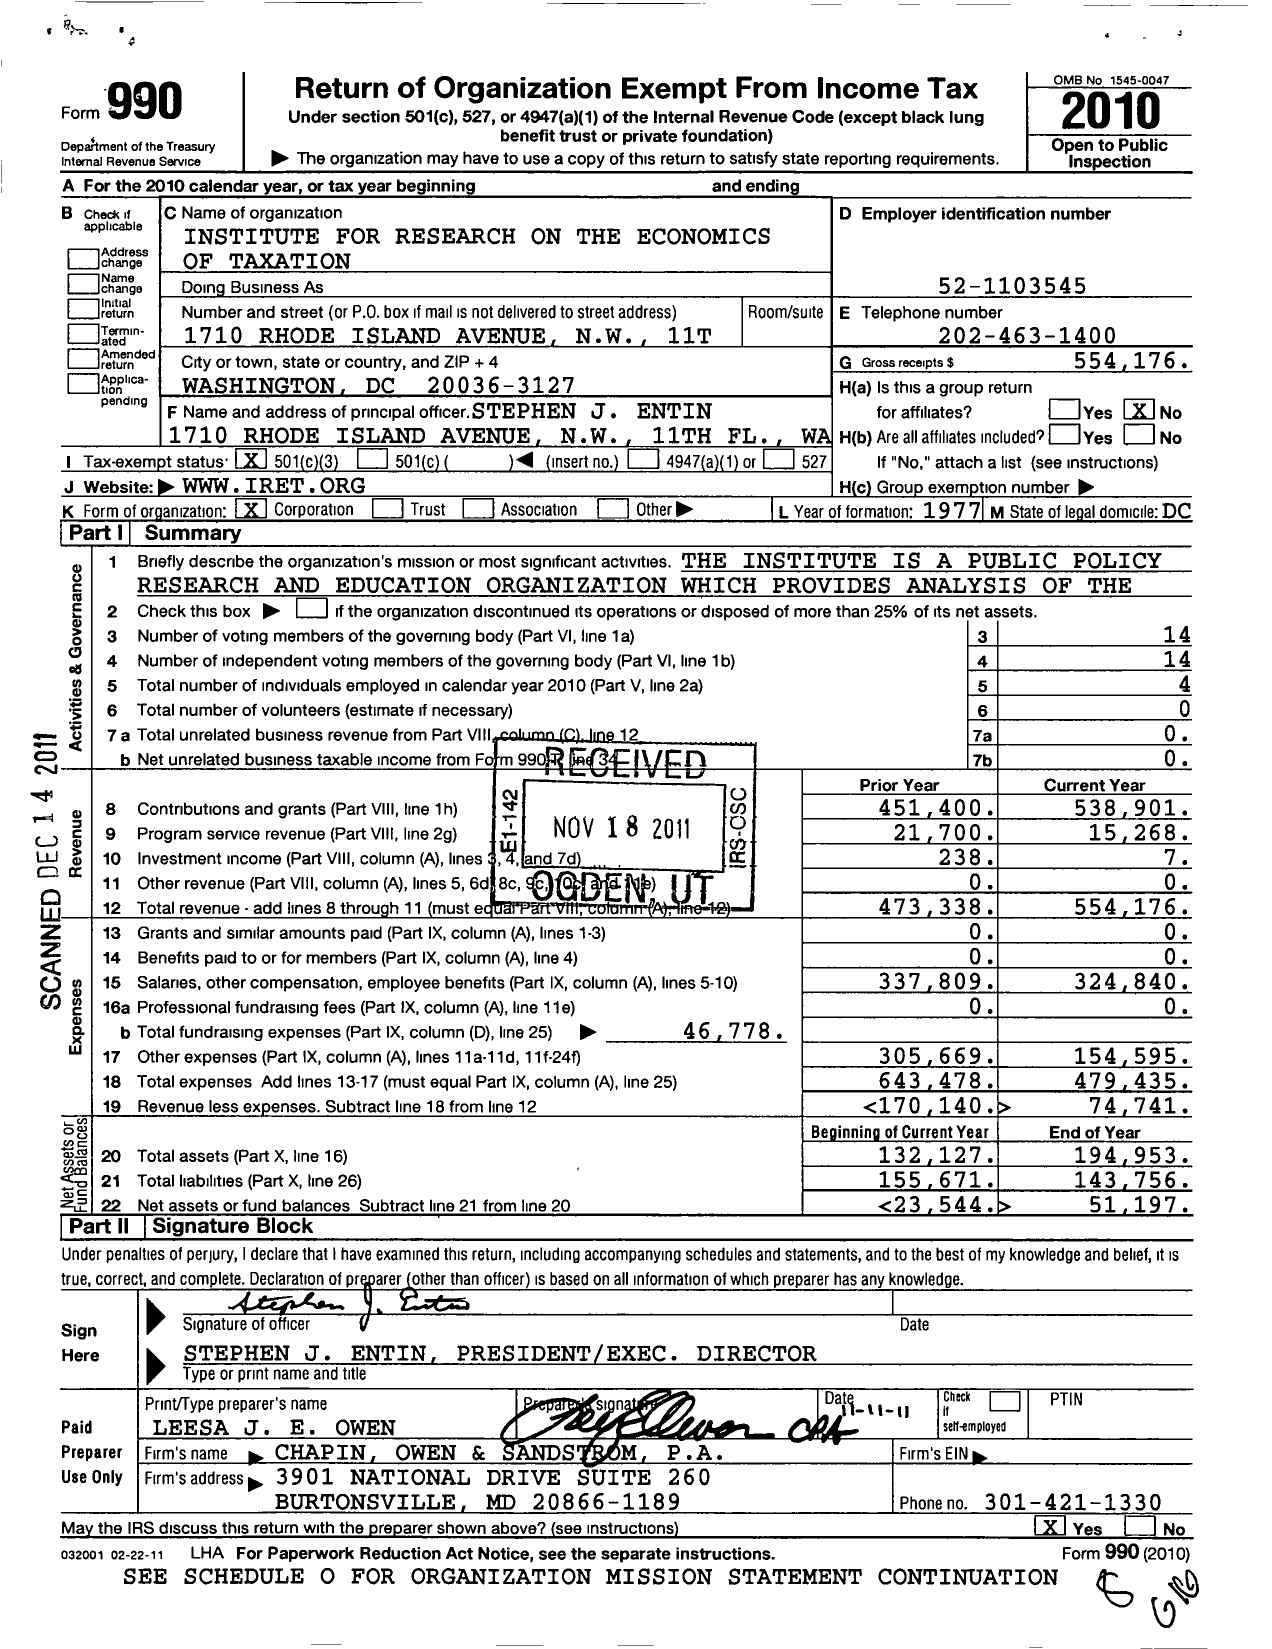 Image of first page of 2010 Form 990 for Institute for Research on the Economics of Taxation